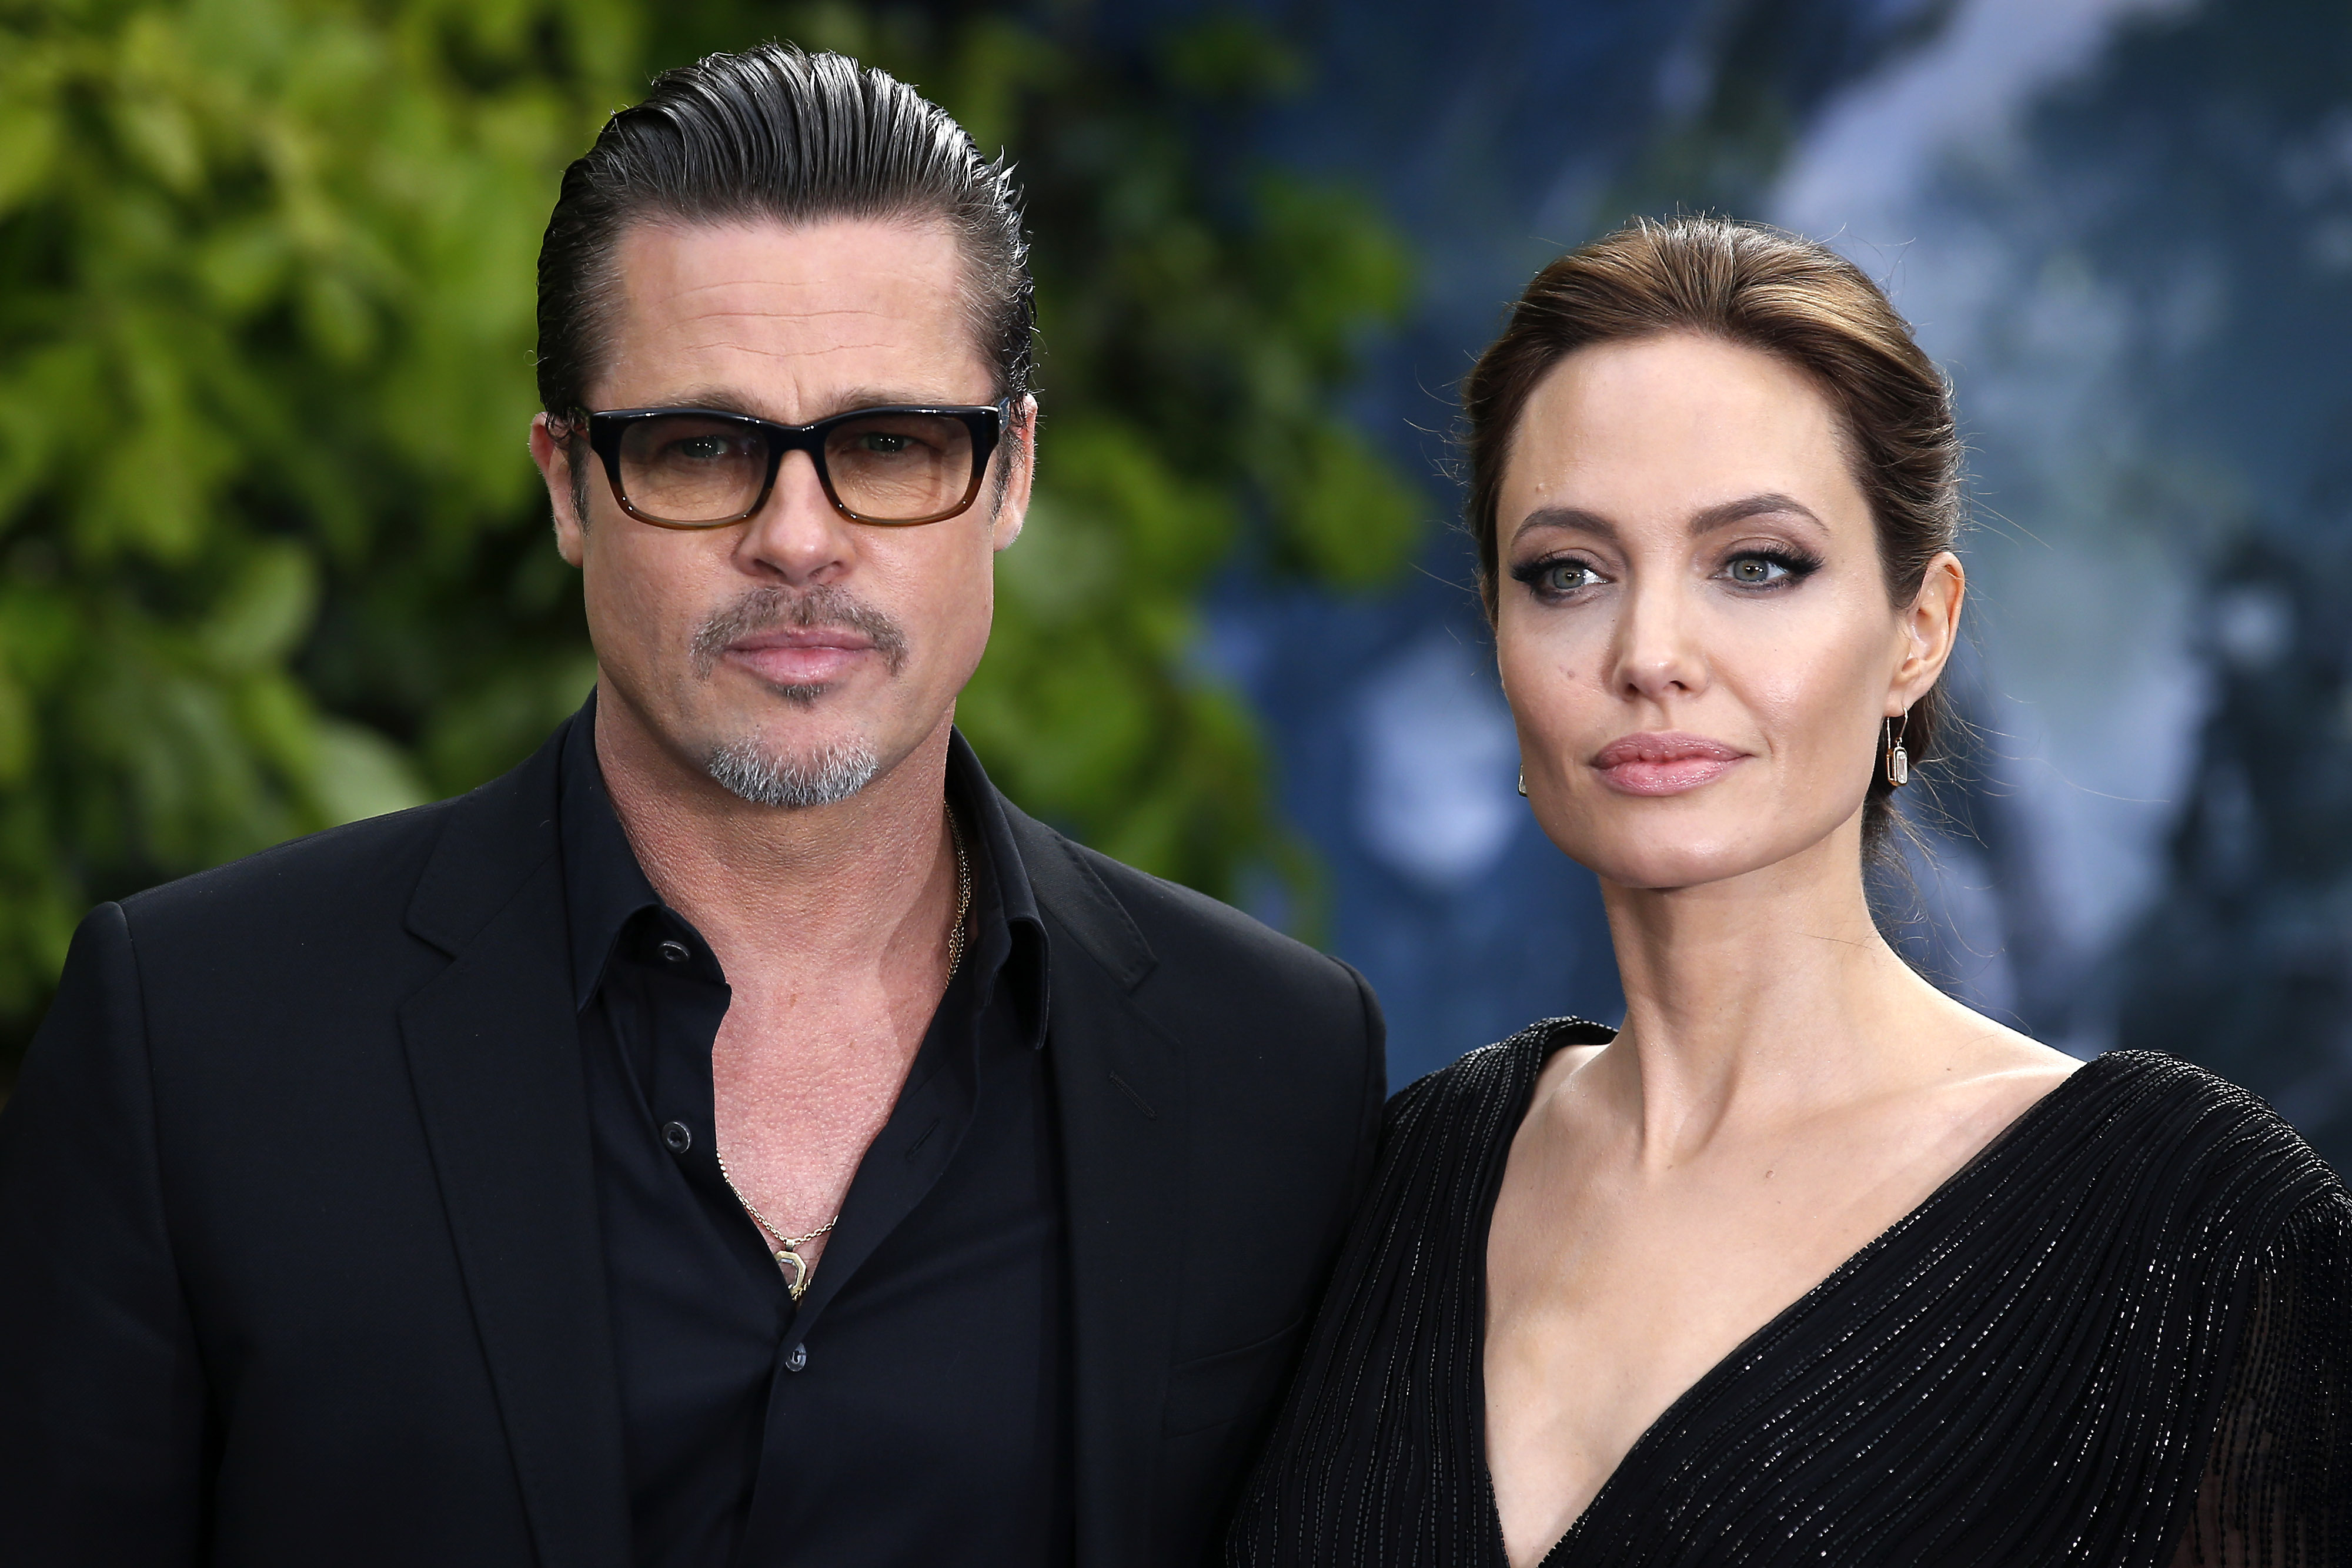 Brad Pitt and Angelina Jolie attending the premiere of "Maleficent" at Kensington Palace, London on August 5, 2014. | Source: Getty Images